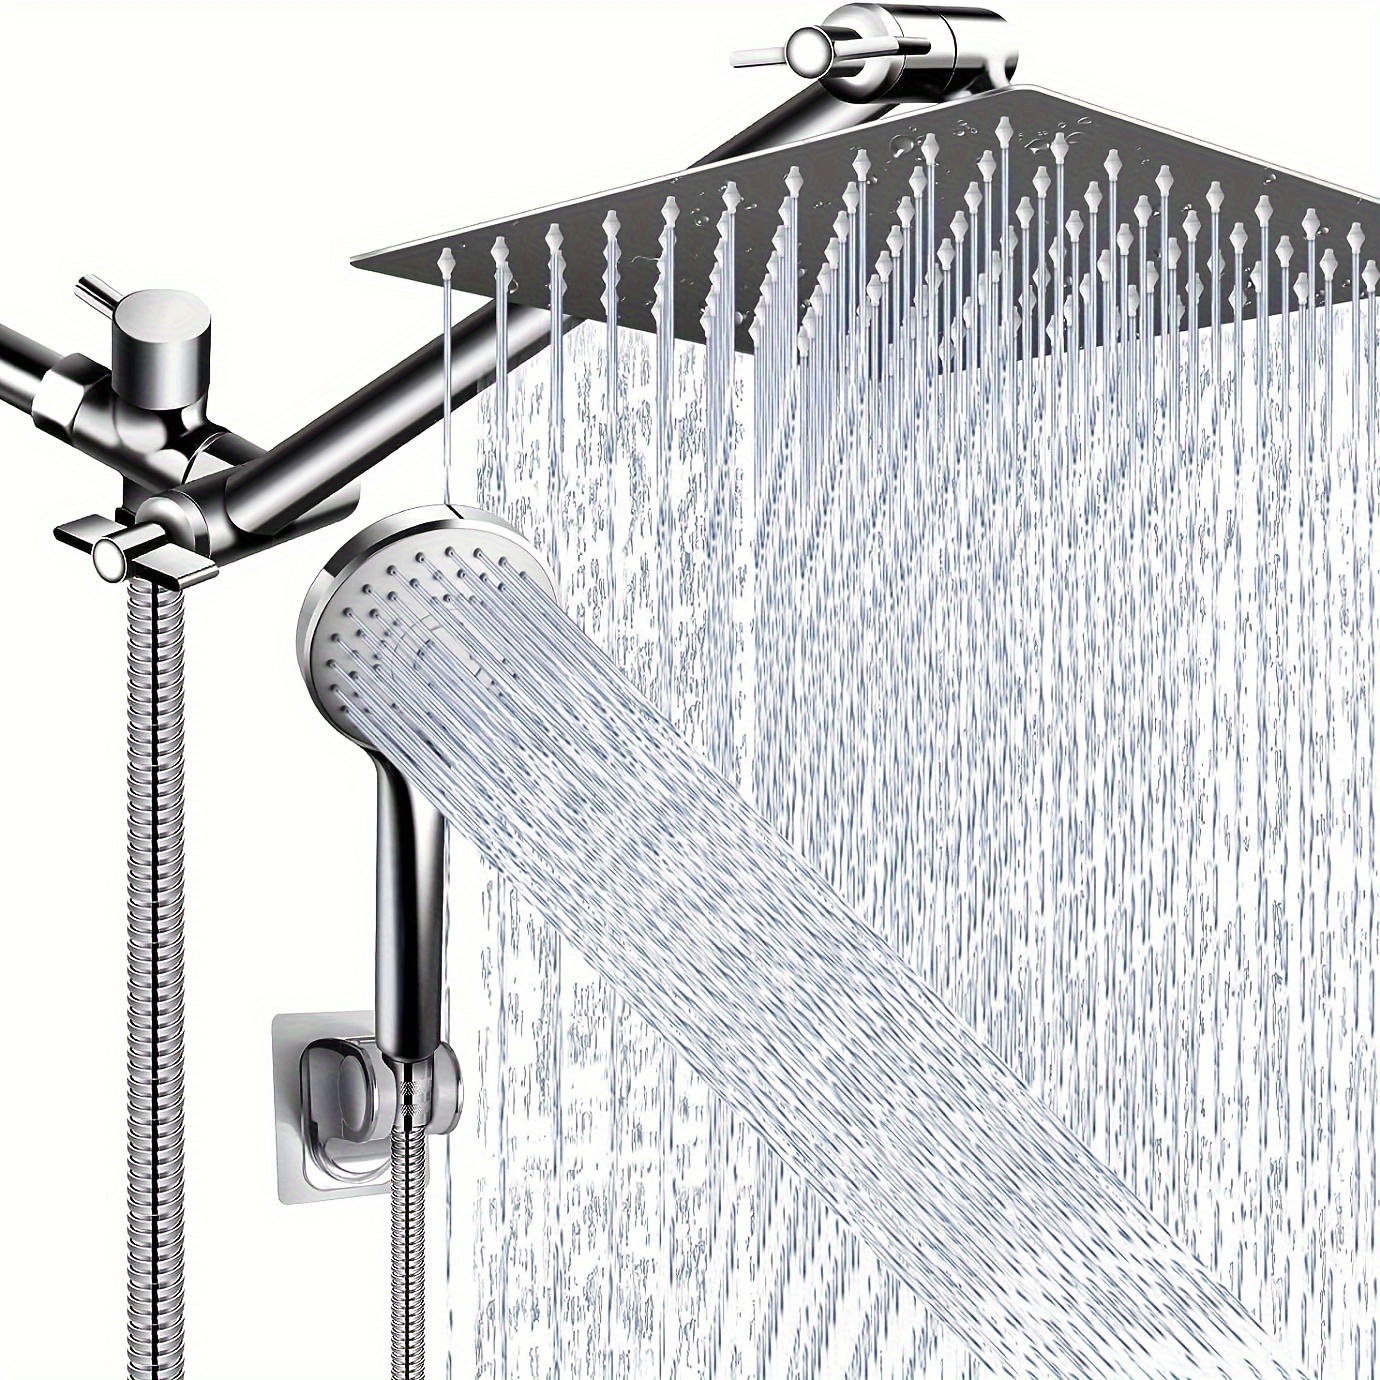 

1set High Pressure Rain Shower Head With 11 Inch Extension Arm And 5-mode Adjustable Settings - Leak Proof And Height/angle Adjustable